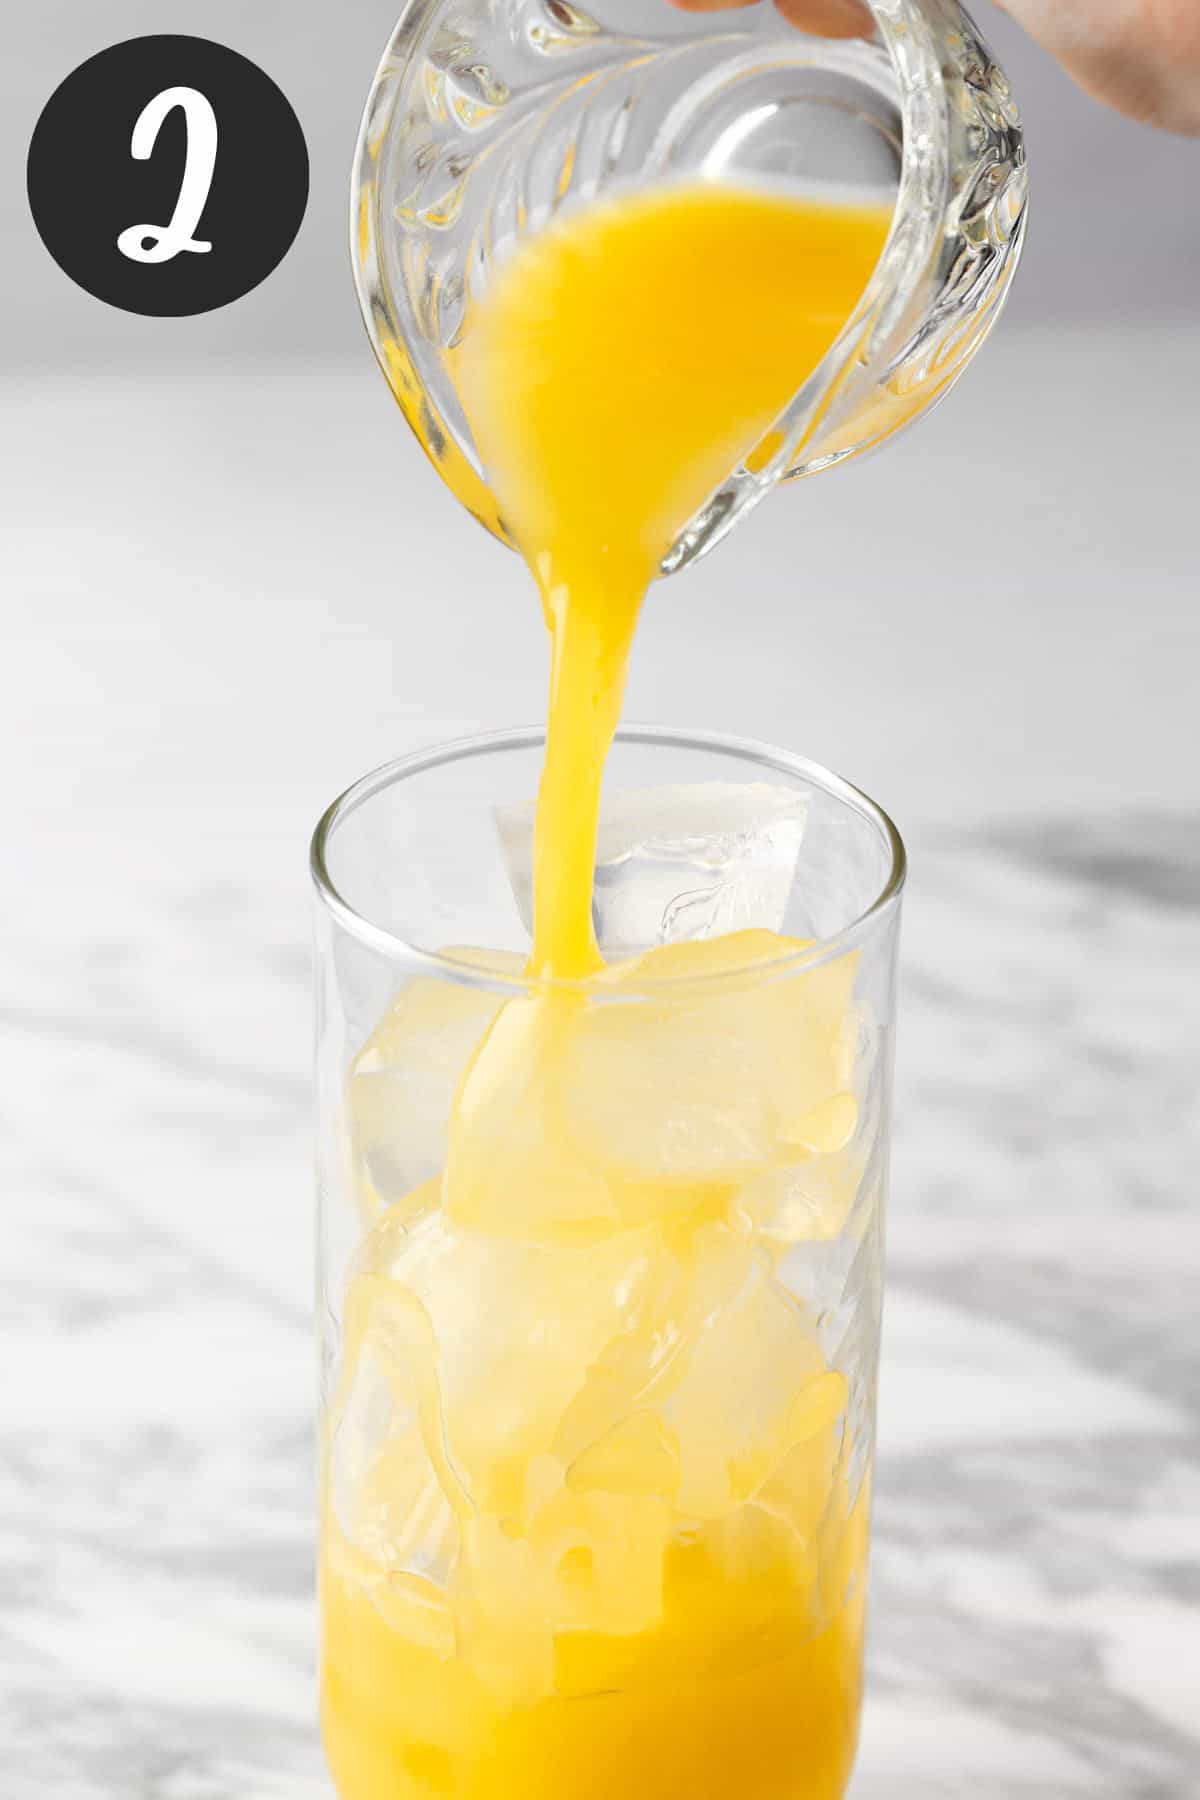 Pouring the tequila and orange juice into a glass filled with ice.